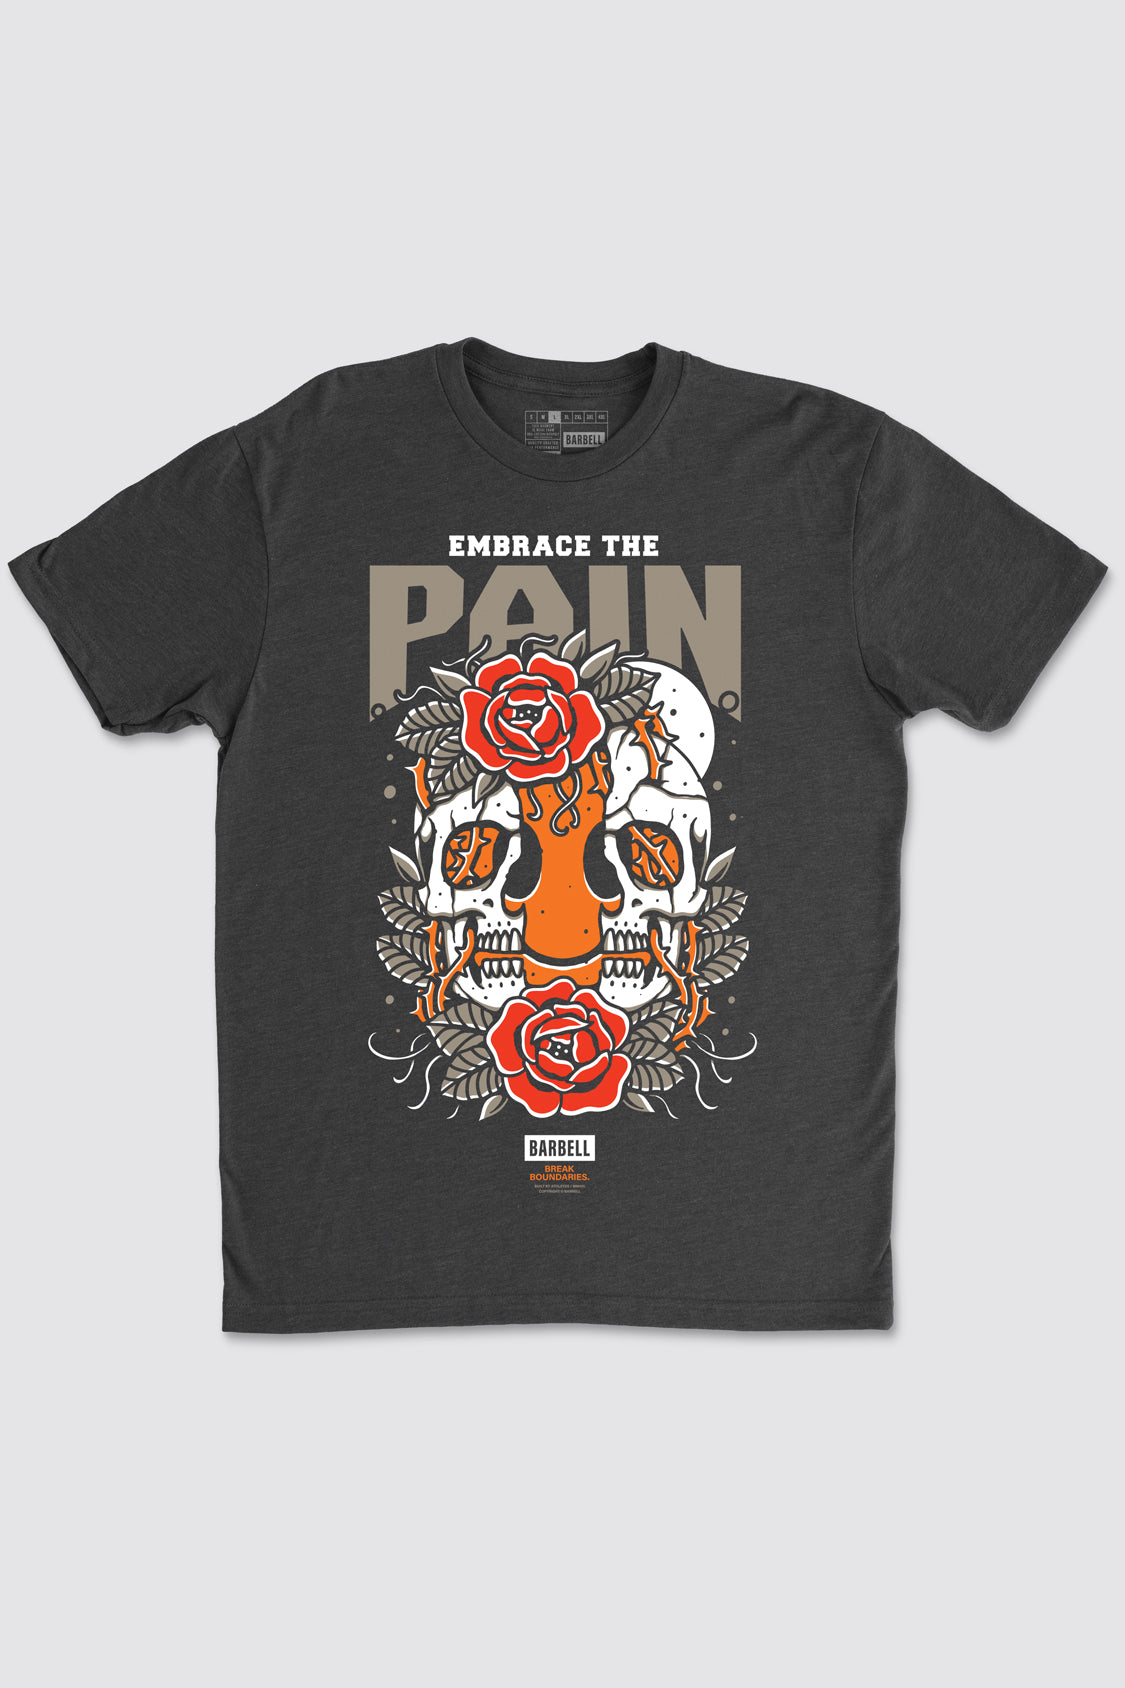 why we made the Embrace The Pain Tee